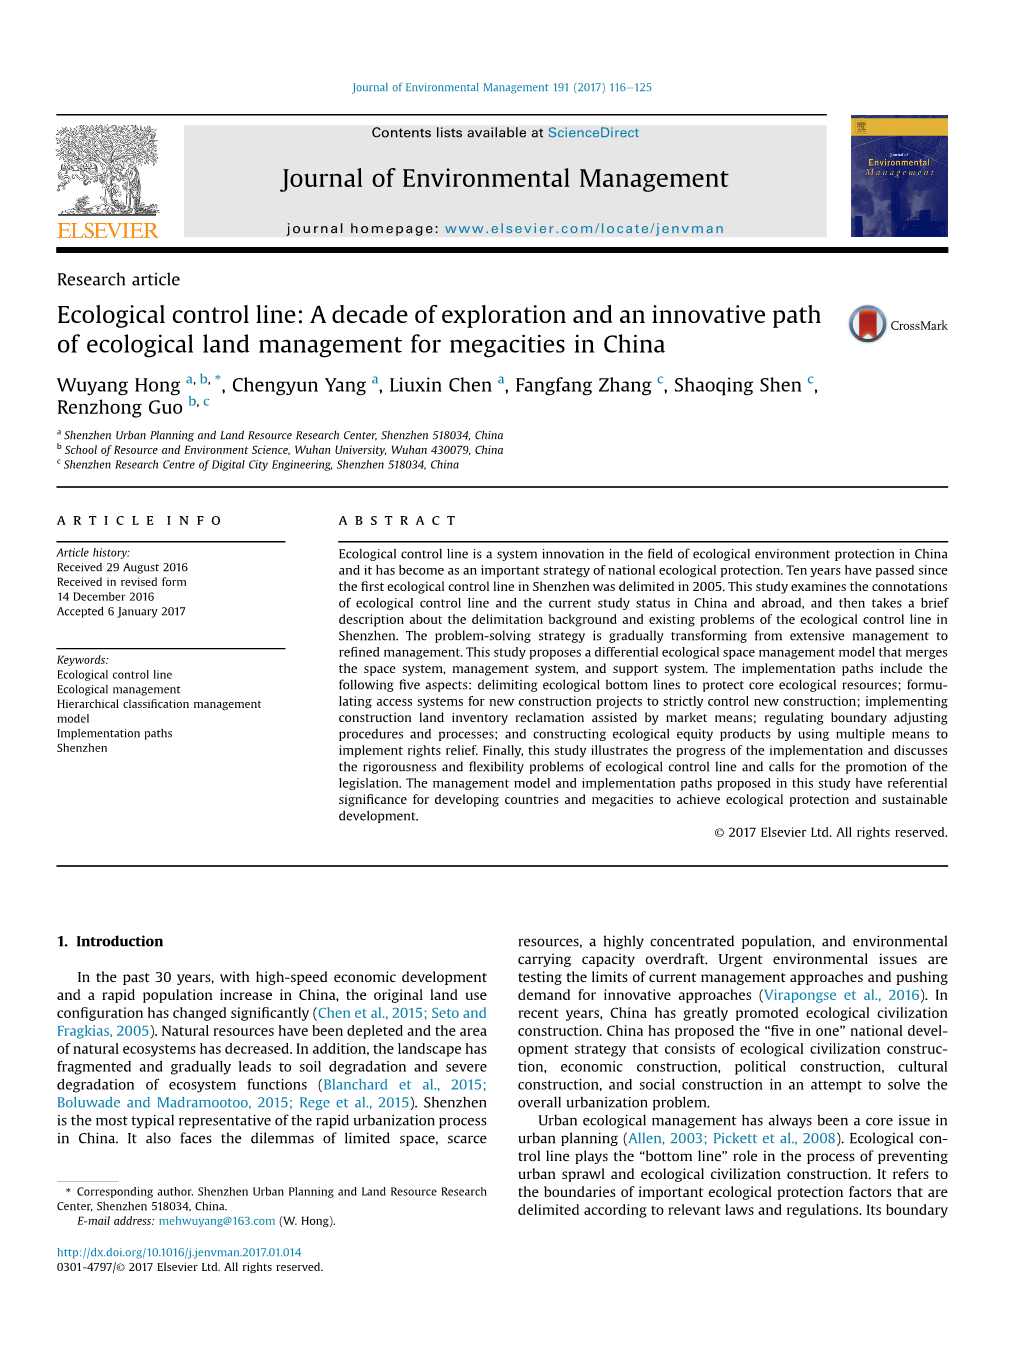 A Decade of Exploration and an Innovative Path of Ecological Land Management for Megacities in China